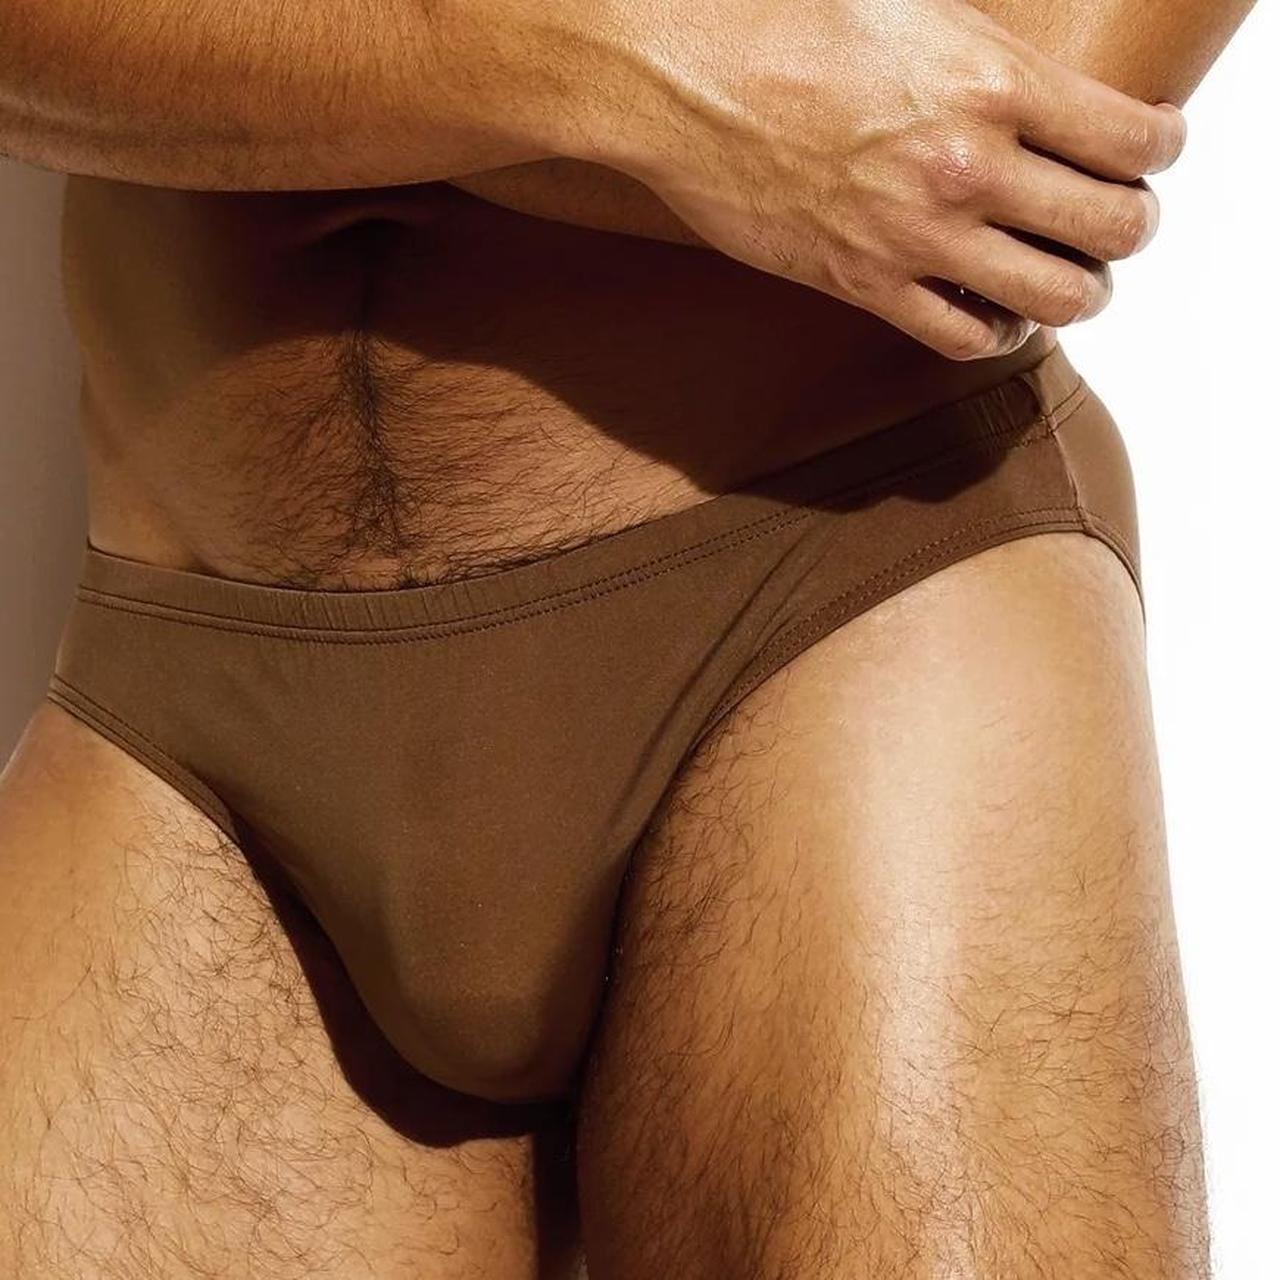 Men's Tan and Brown Boxers-and-briefs